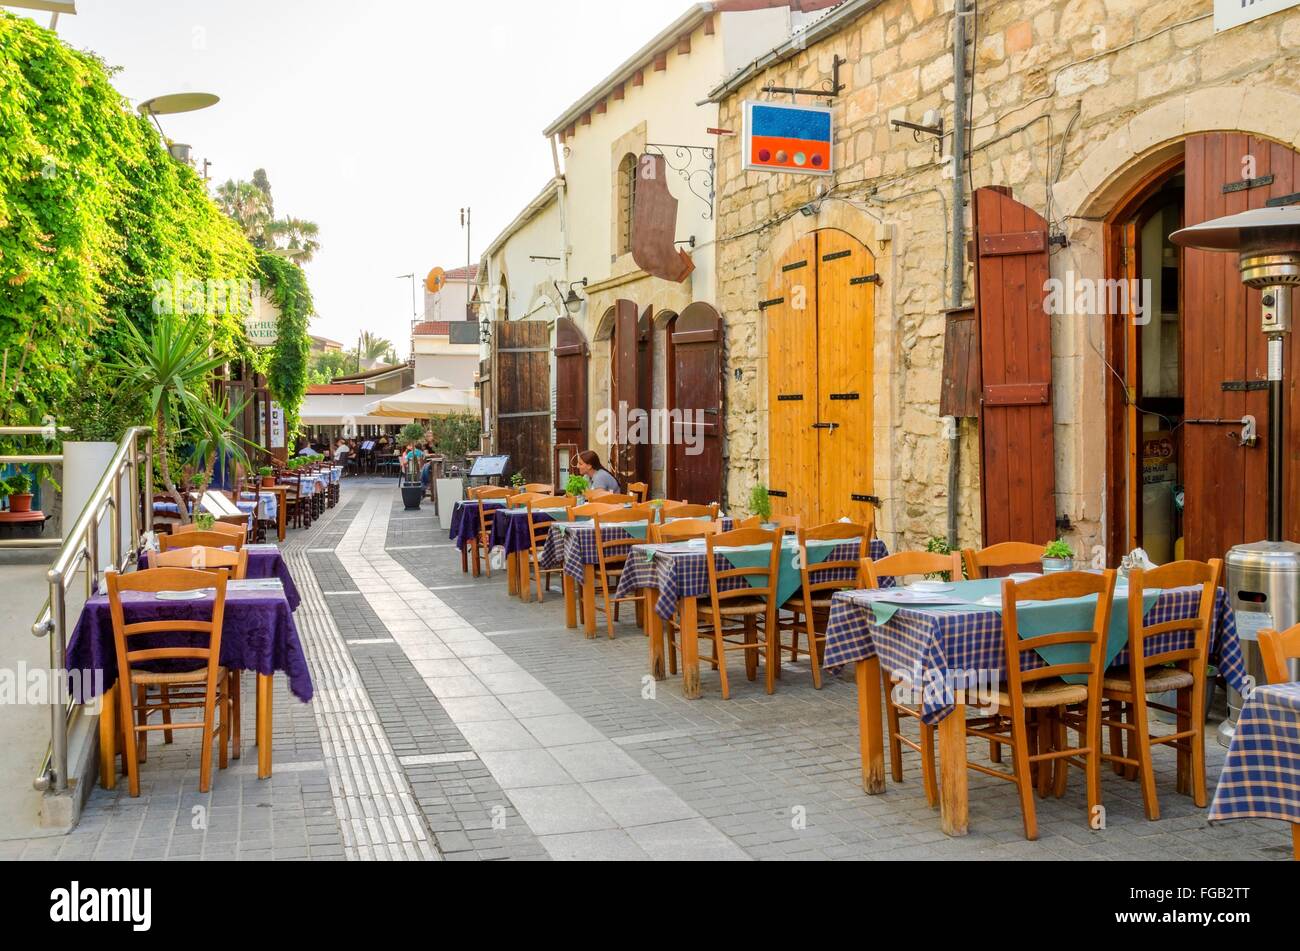 An alley in the historic medieval city center of Limassol in Cyprus. A view of the cafe, restaurant, cypriot taverna, tables and Stock Photo